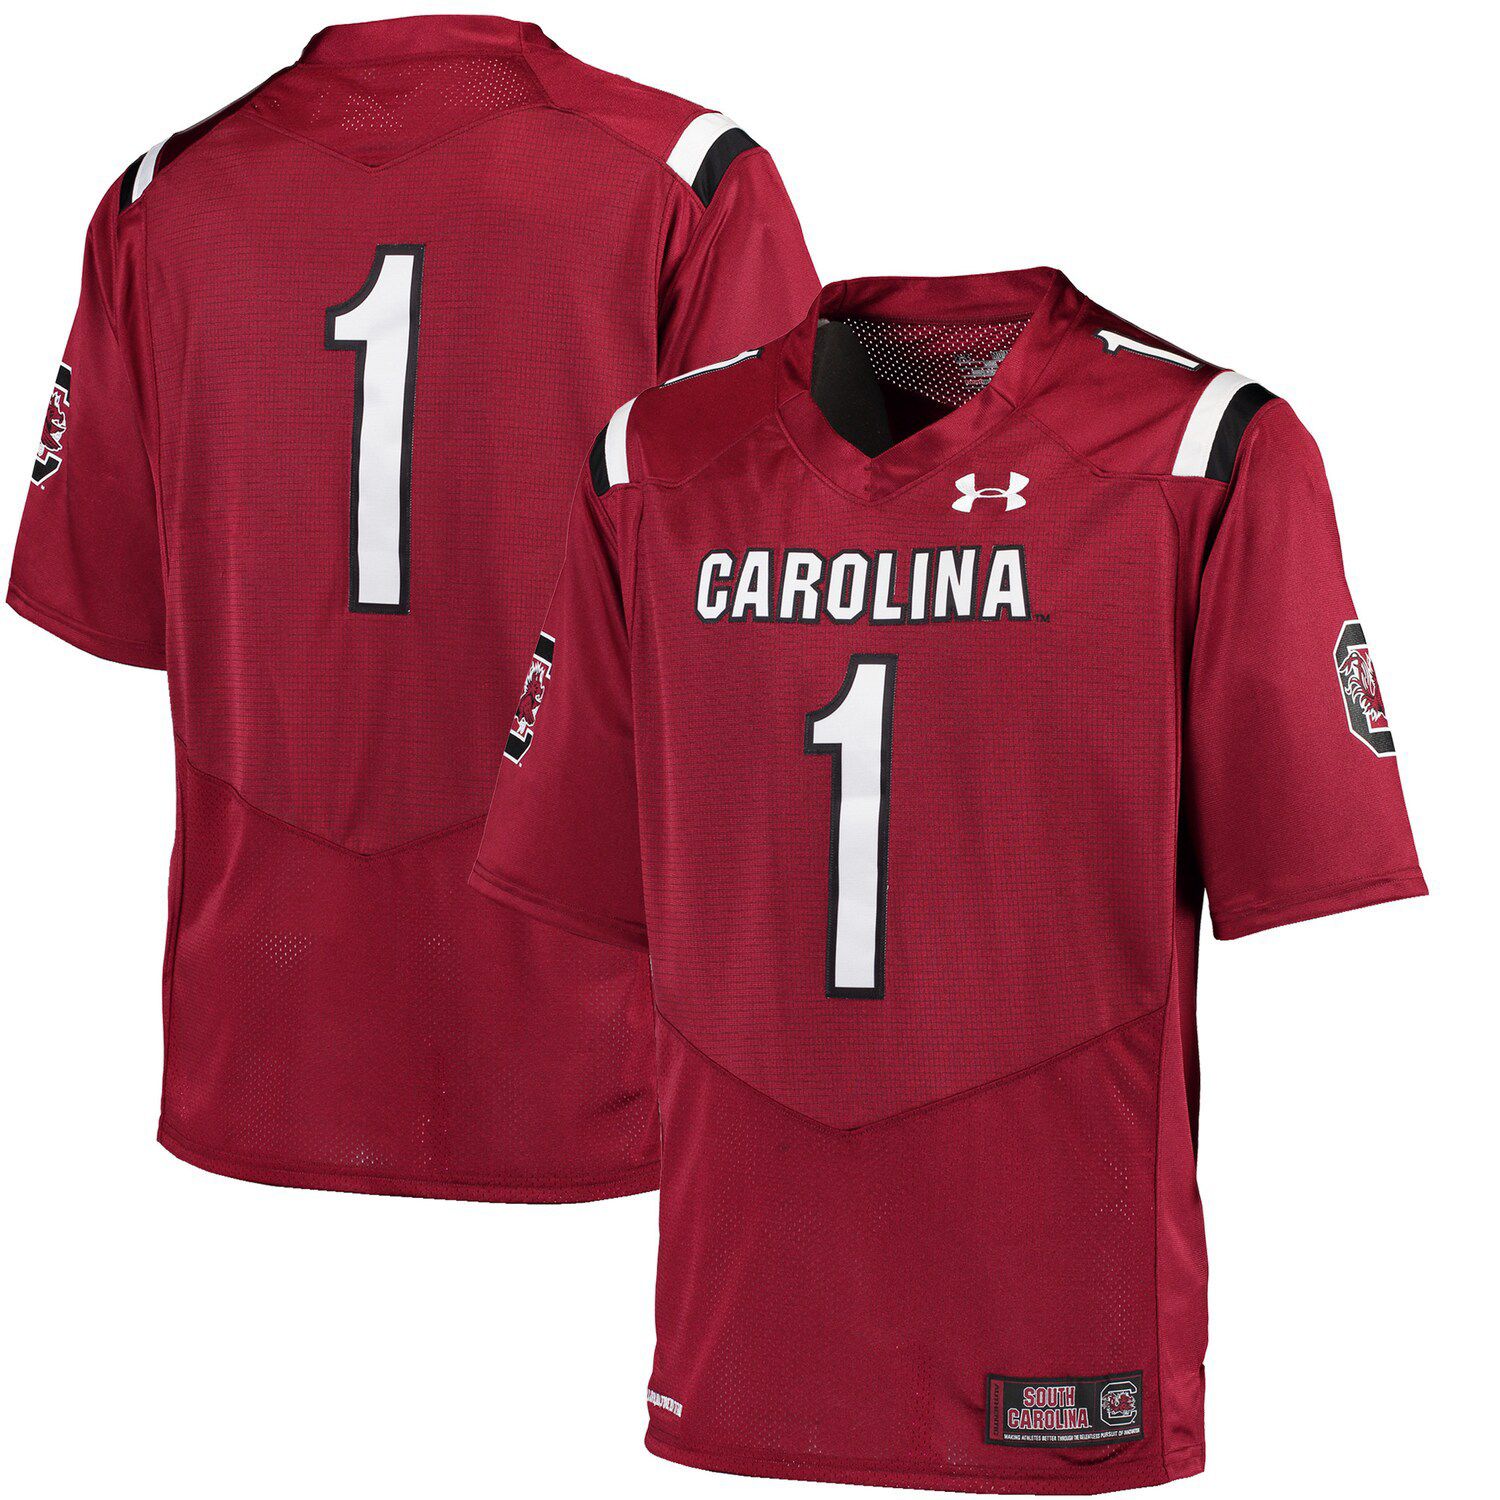 gamecock jersey under armour